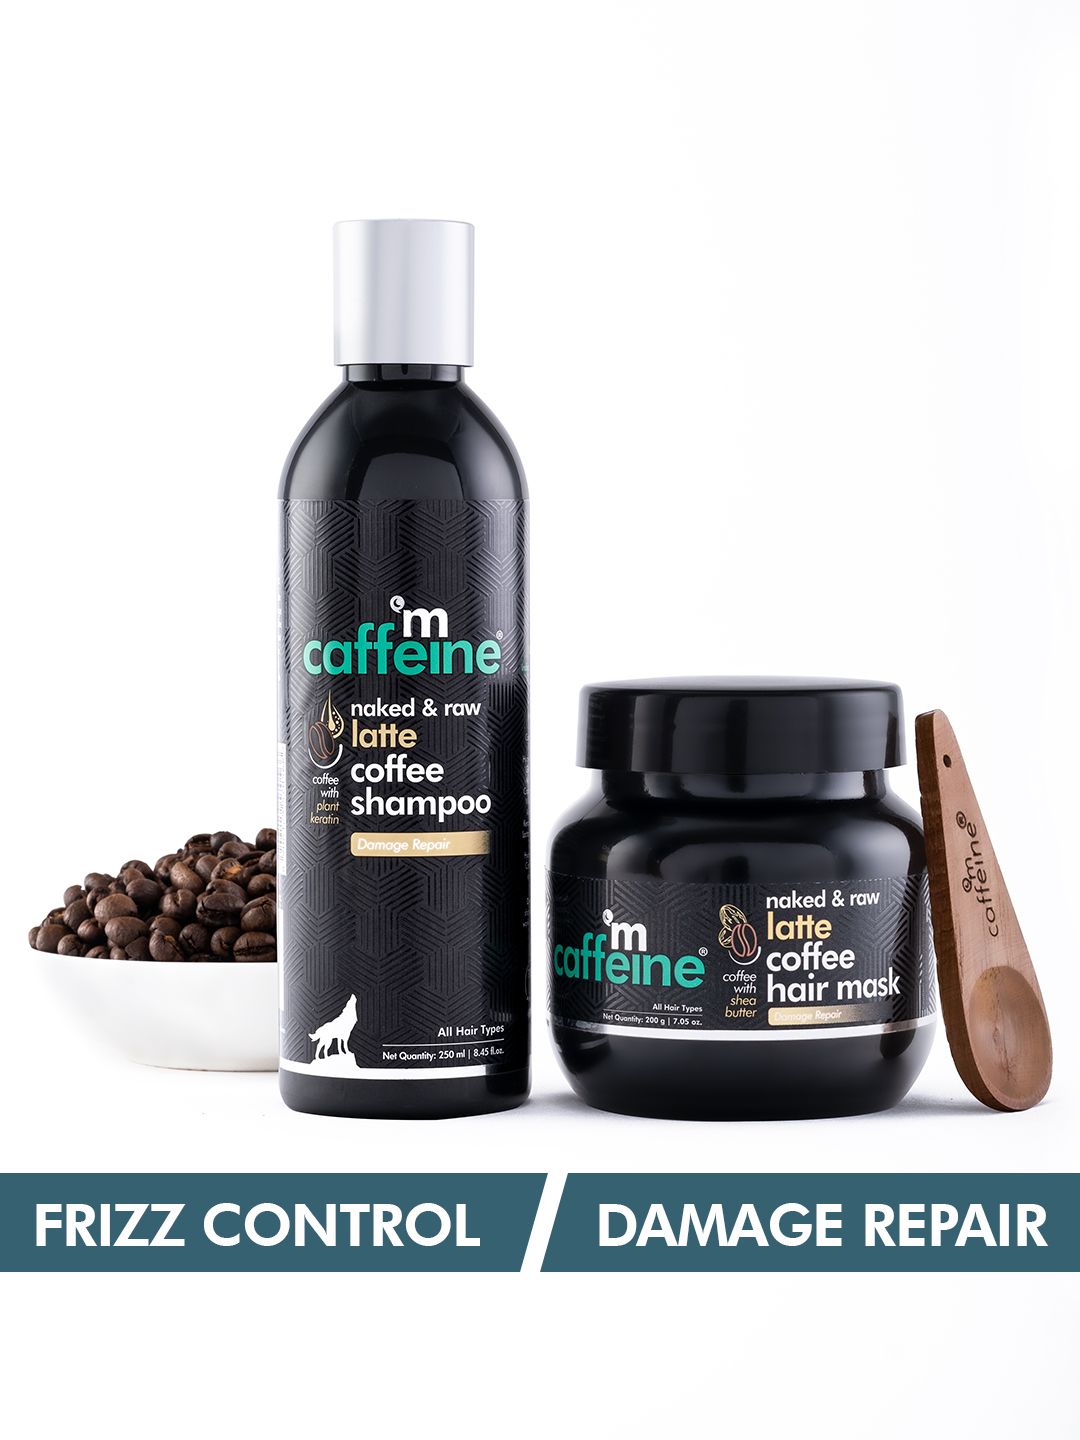 mCaffeine Intense Damage Repair & Frizz Control Kit with Shampoo & Hair Mask Price in India